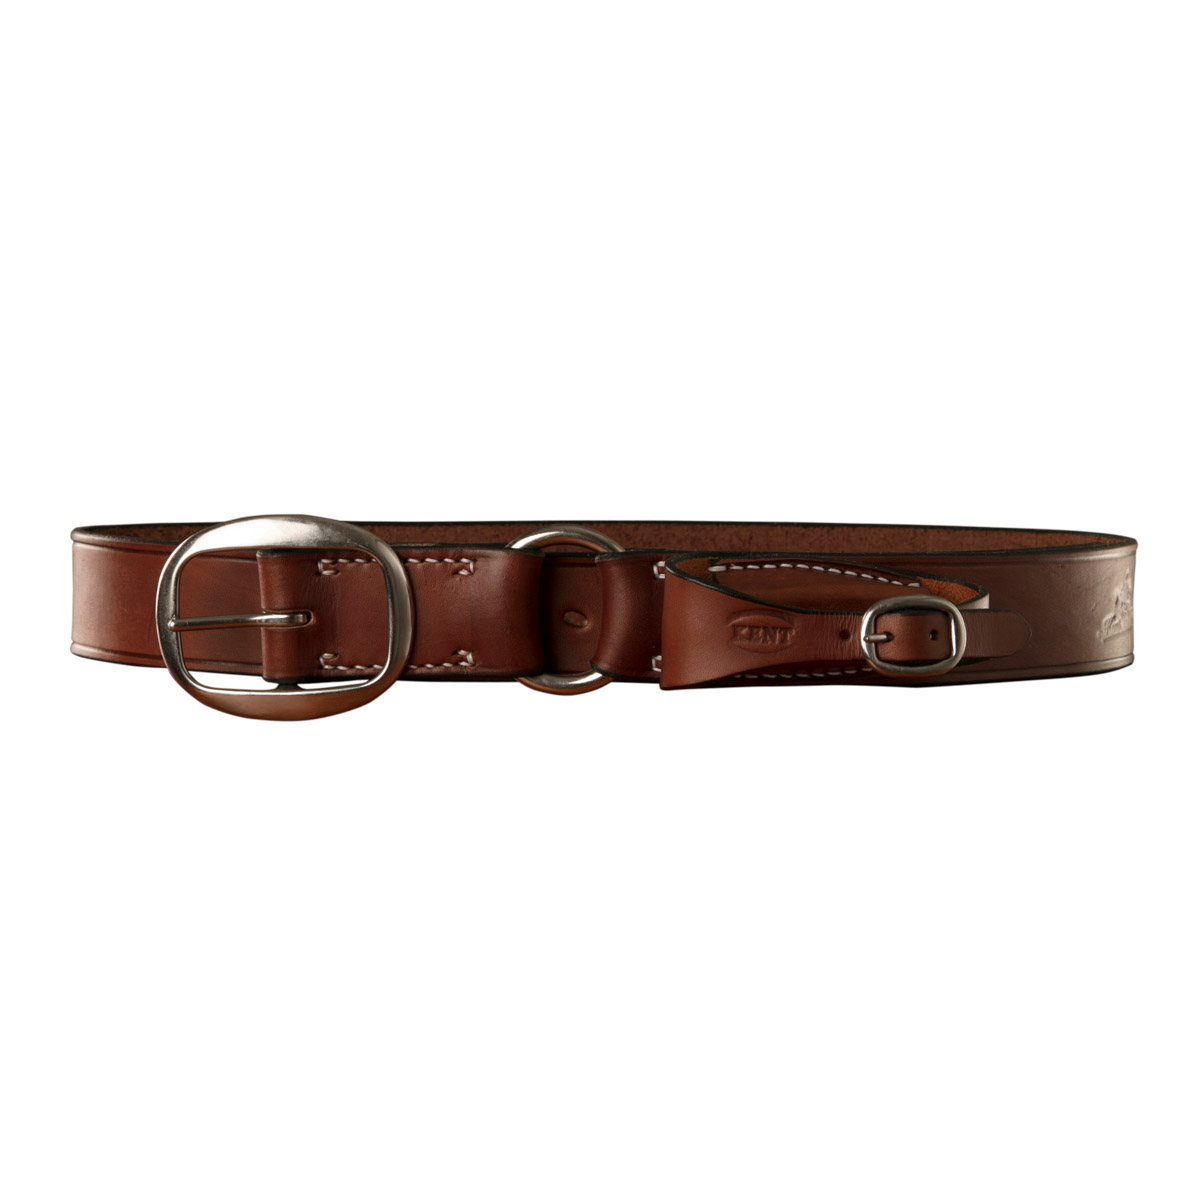 Stockmans Belt, Solid Leather, with Stainless Steel Swage Buckle, Ring and Pouch for Pocket Knife 1